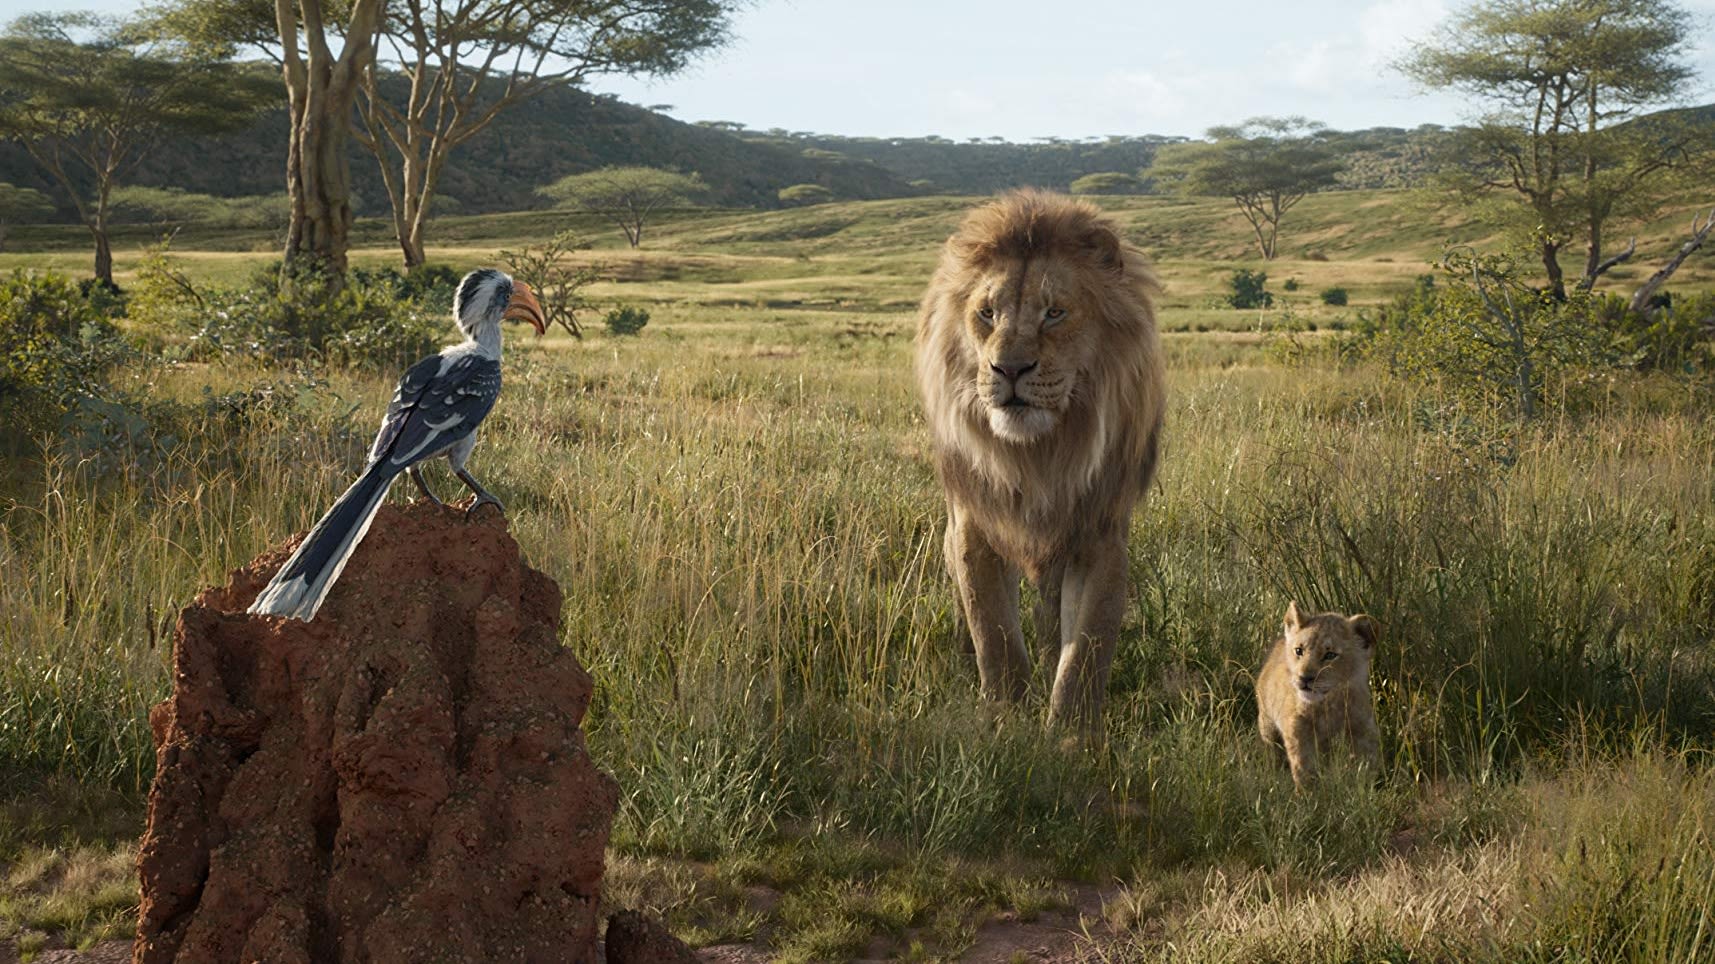 Disney's 'The Lion King' hauls in $54.7 million in China debut